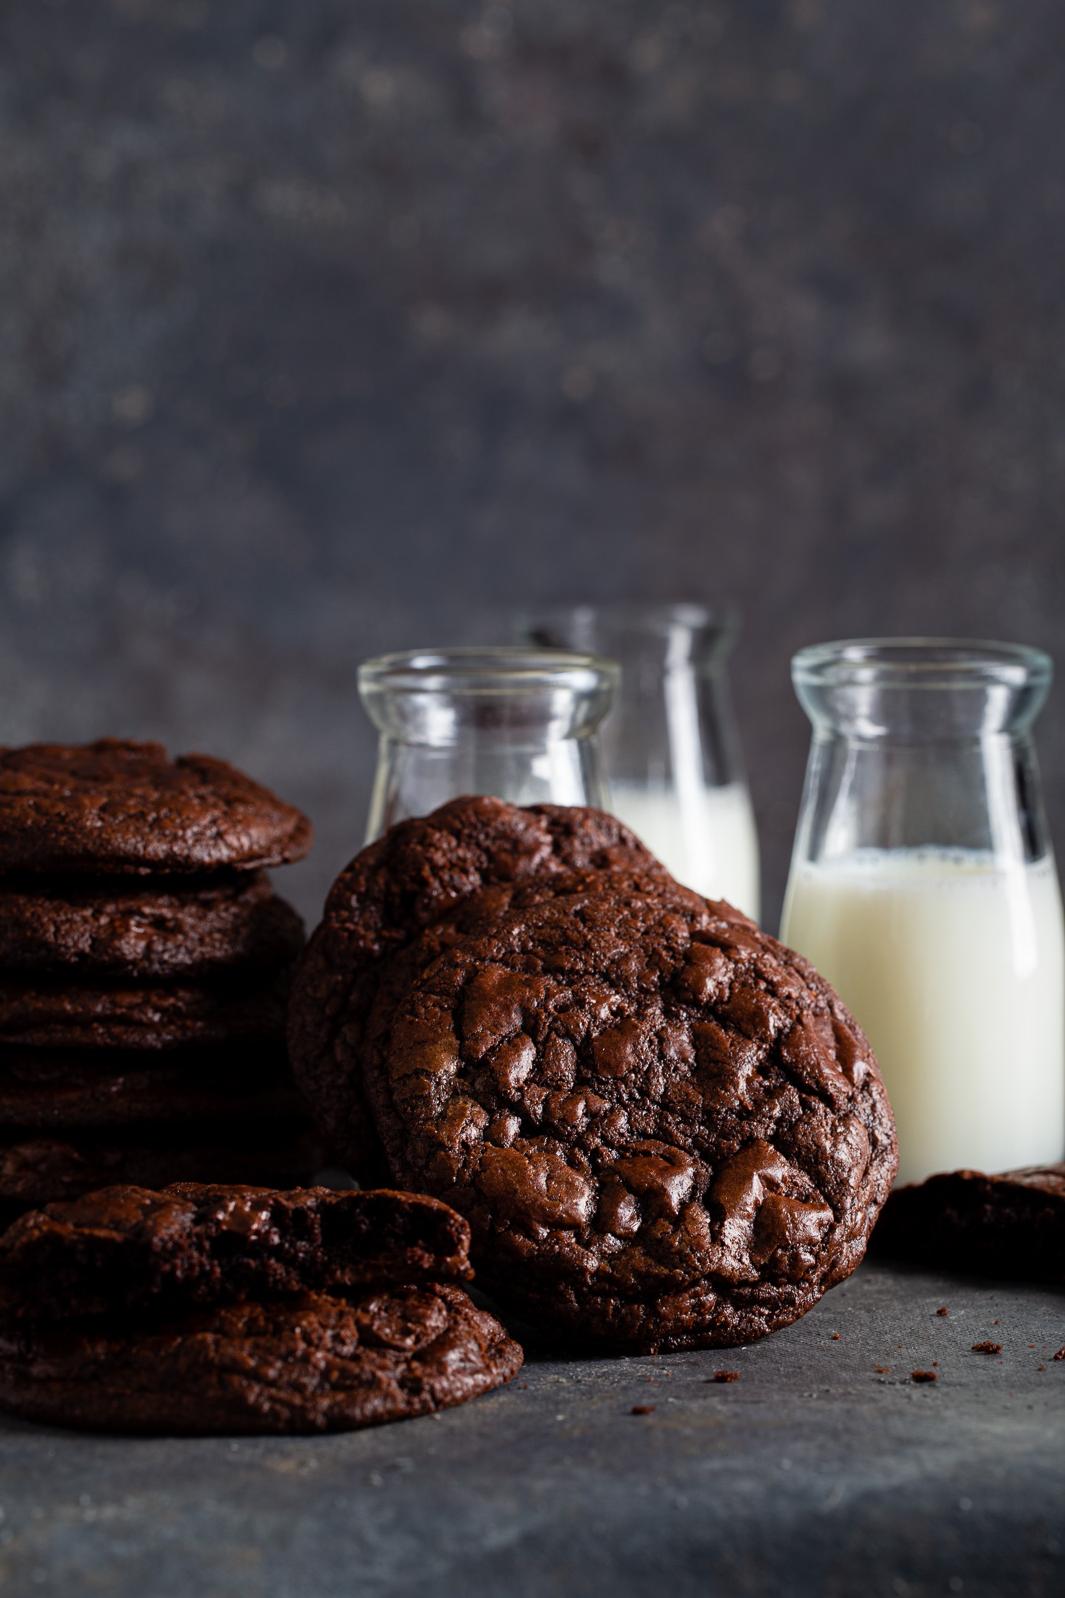  Cookies may come and go, but these dark chocolate espresso ones are sure to stay in your heart.